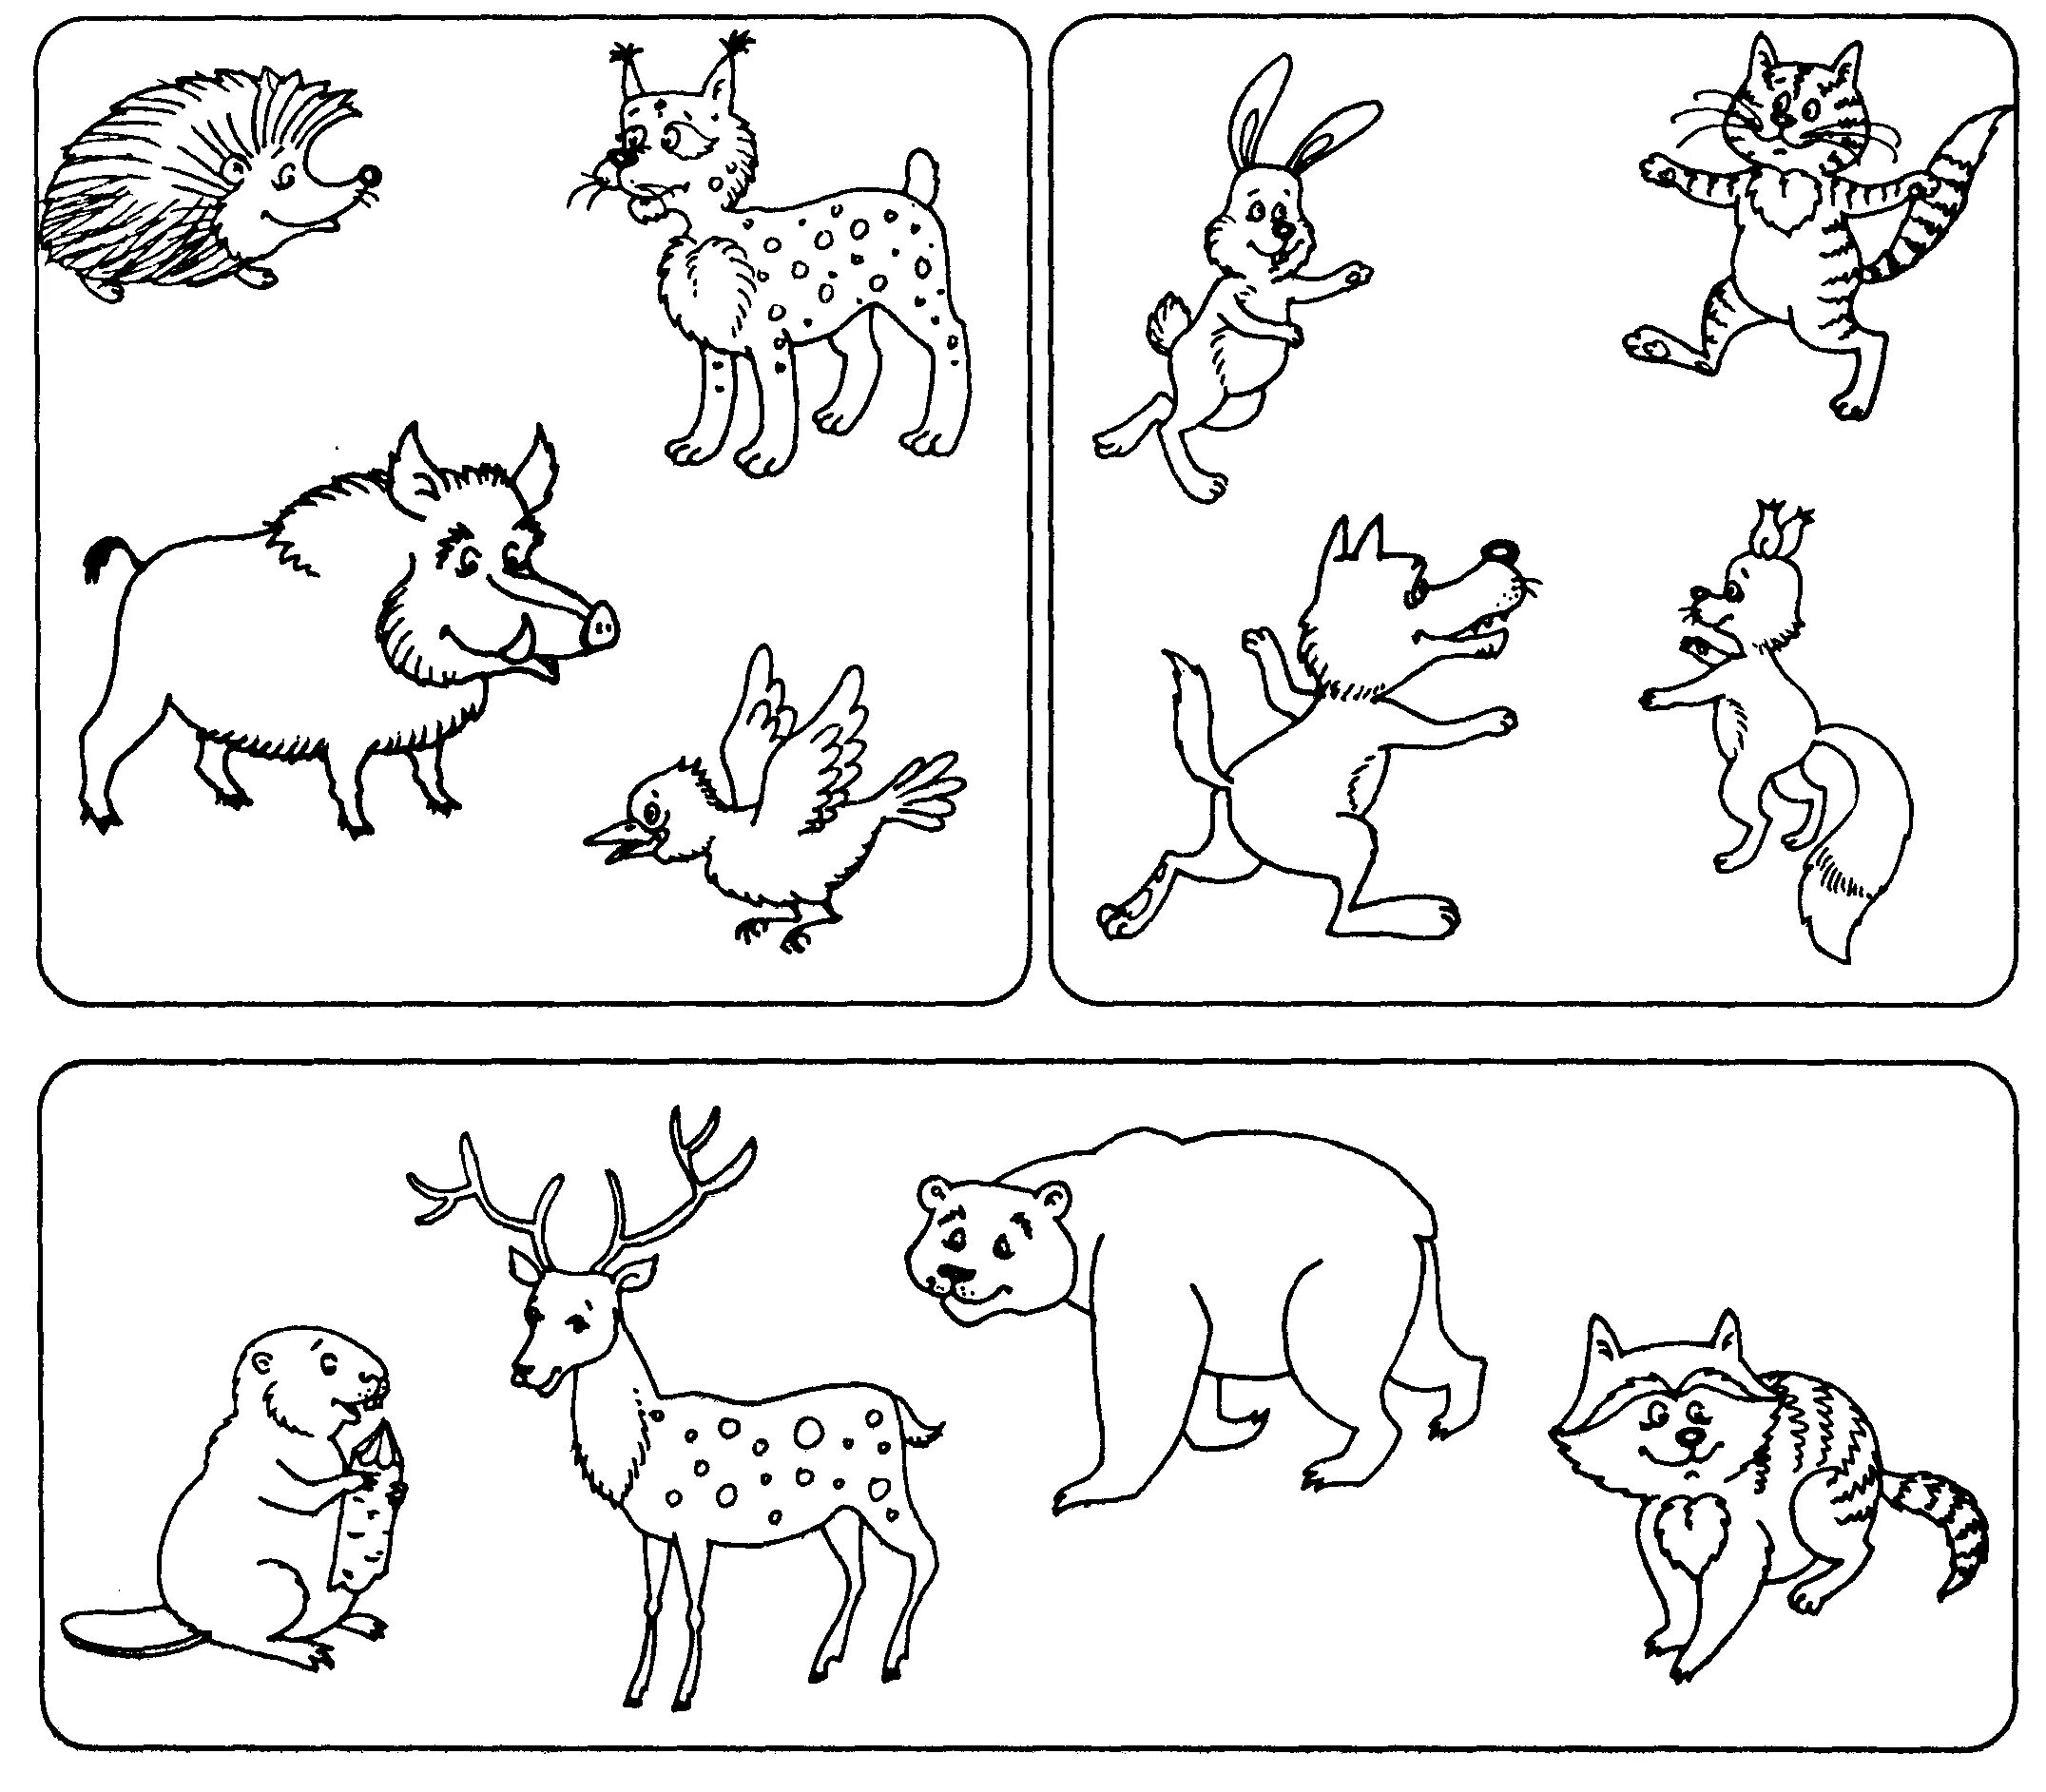 Exotic wild animal coloring page